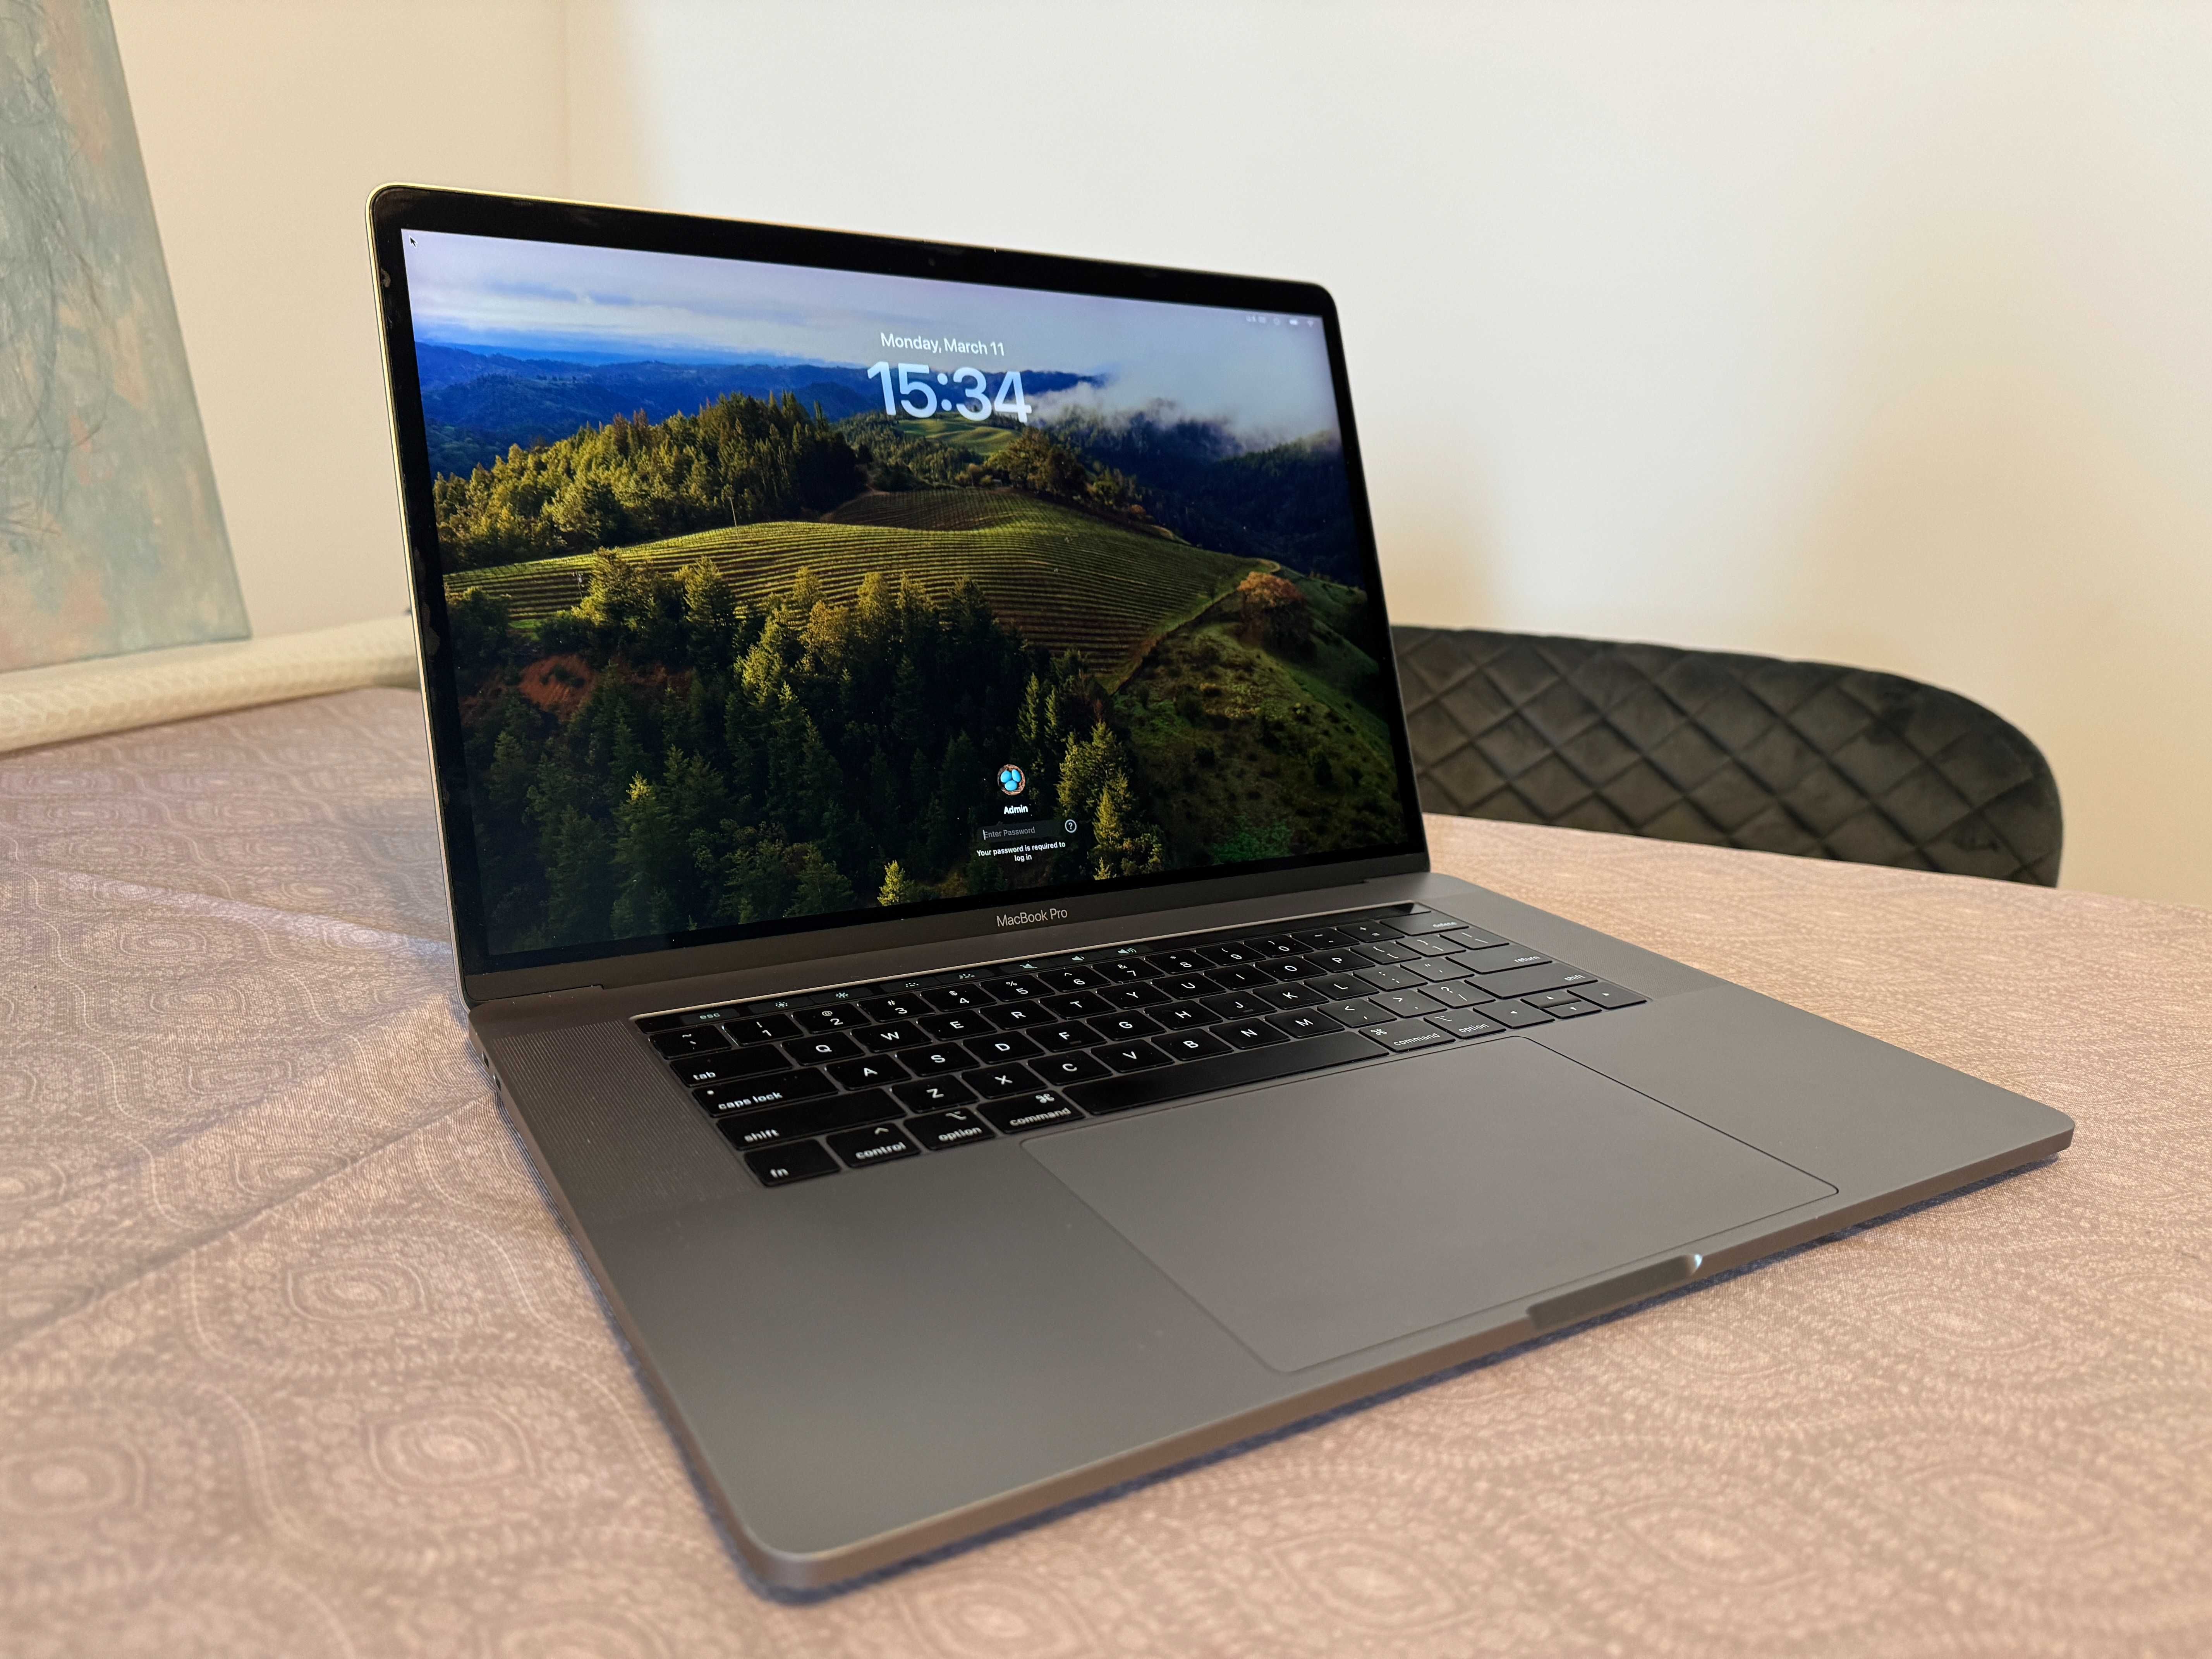 MacBook Pro 15" late 2018 6 core - i7 2.6GHz / 32GB 2400 MHz / 512GB